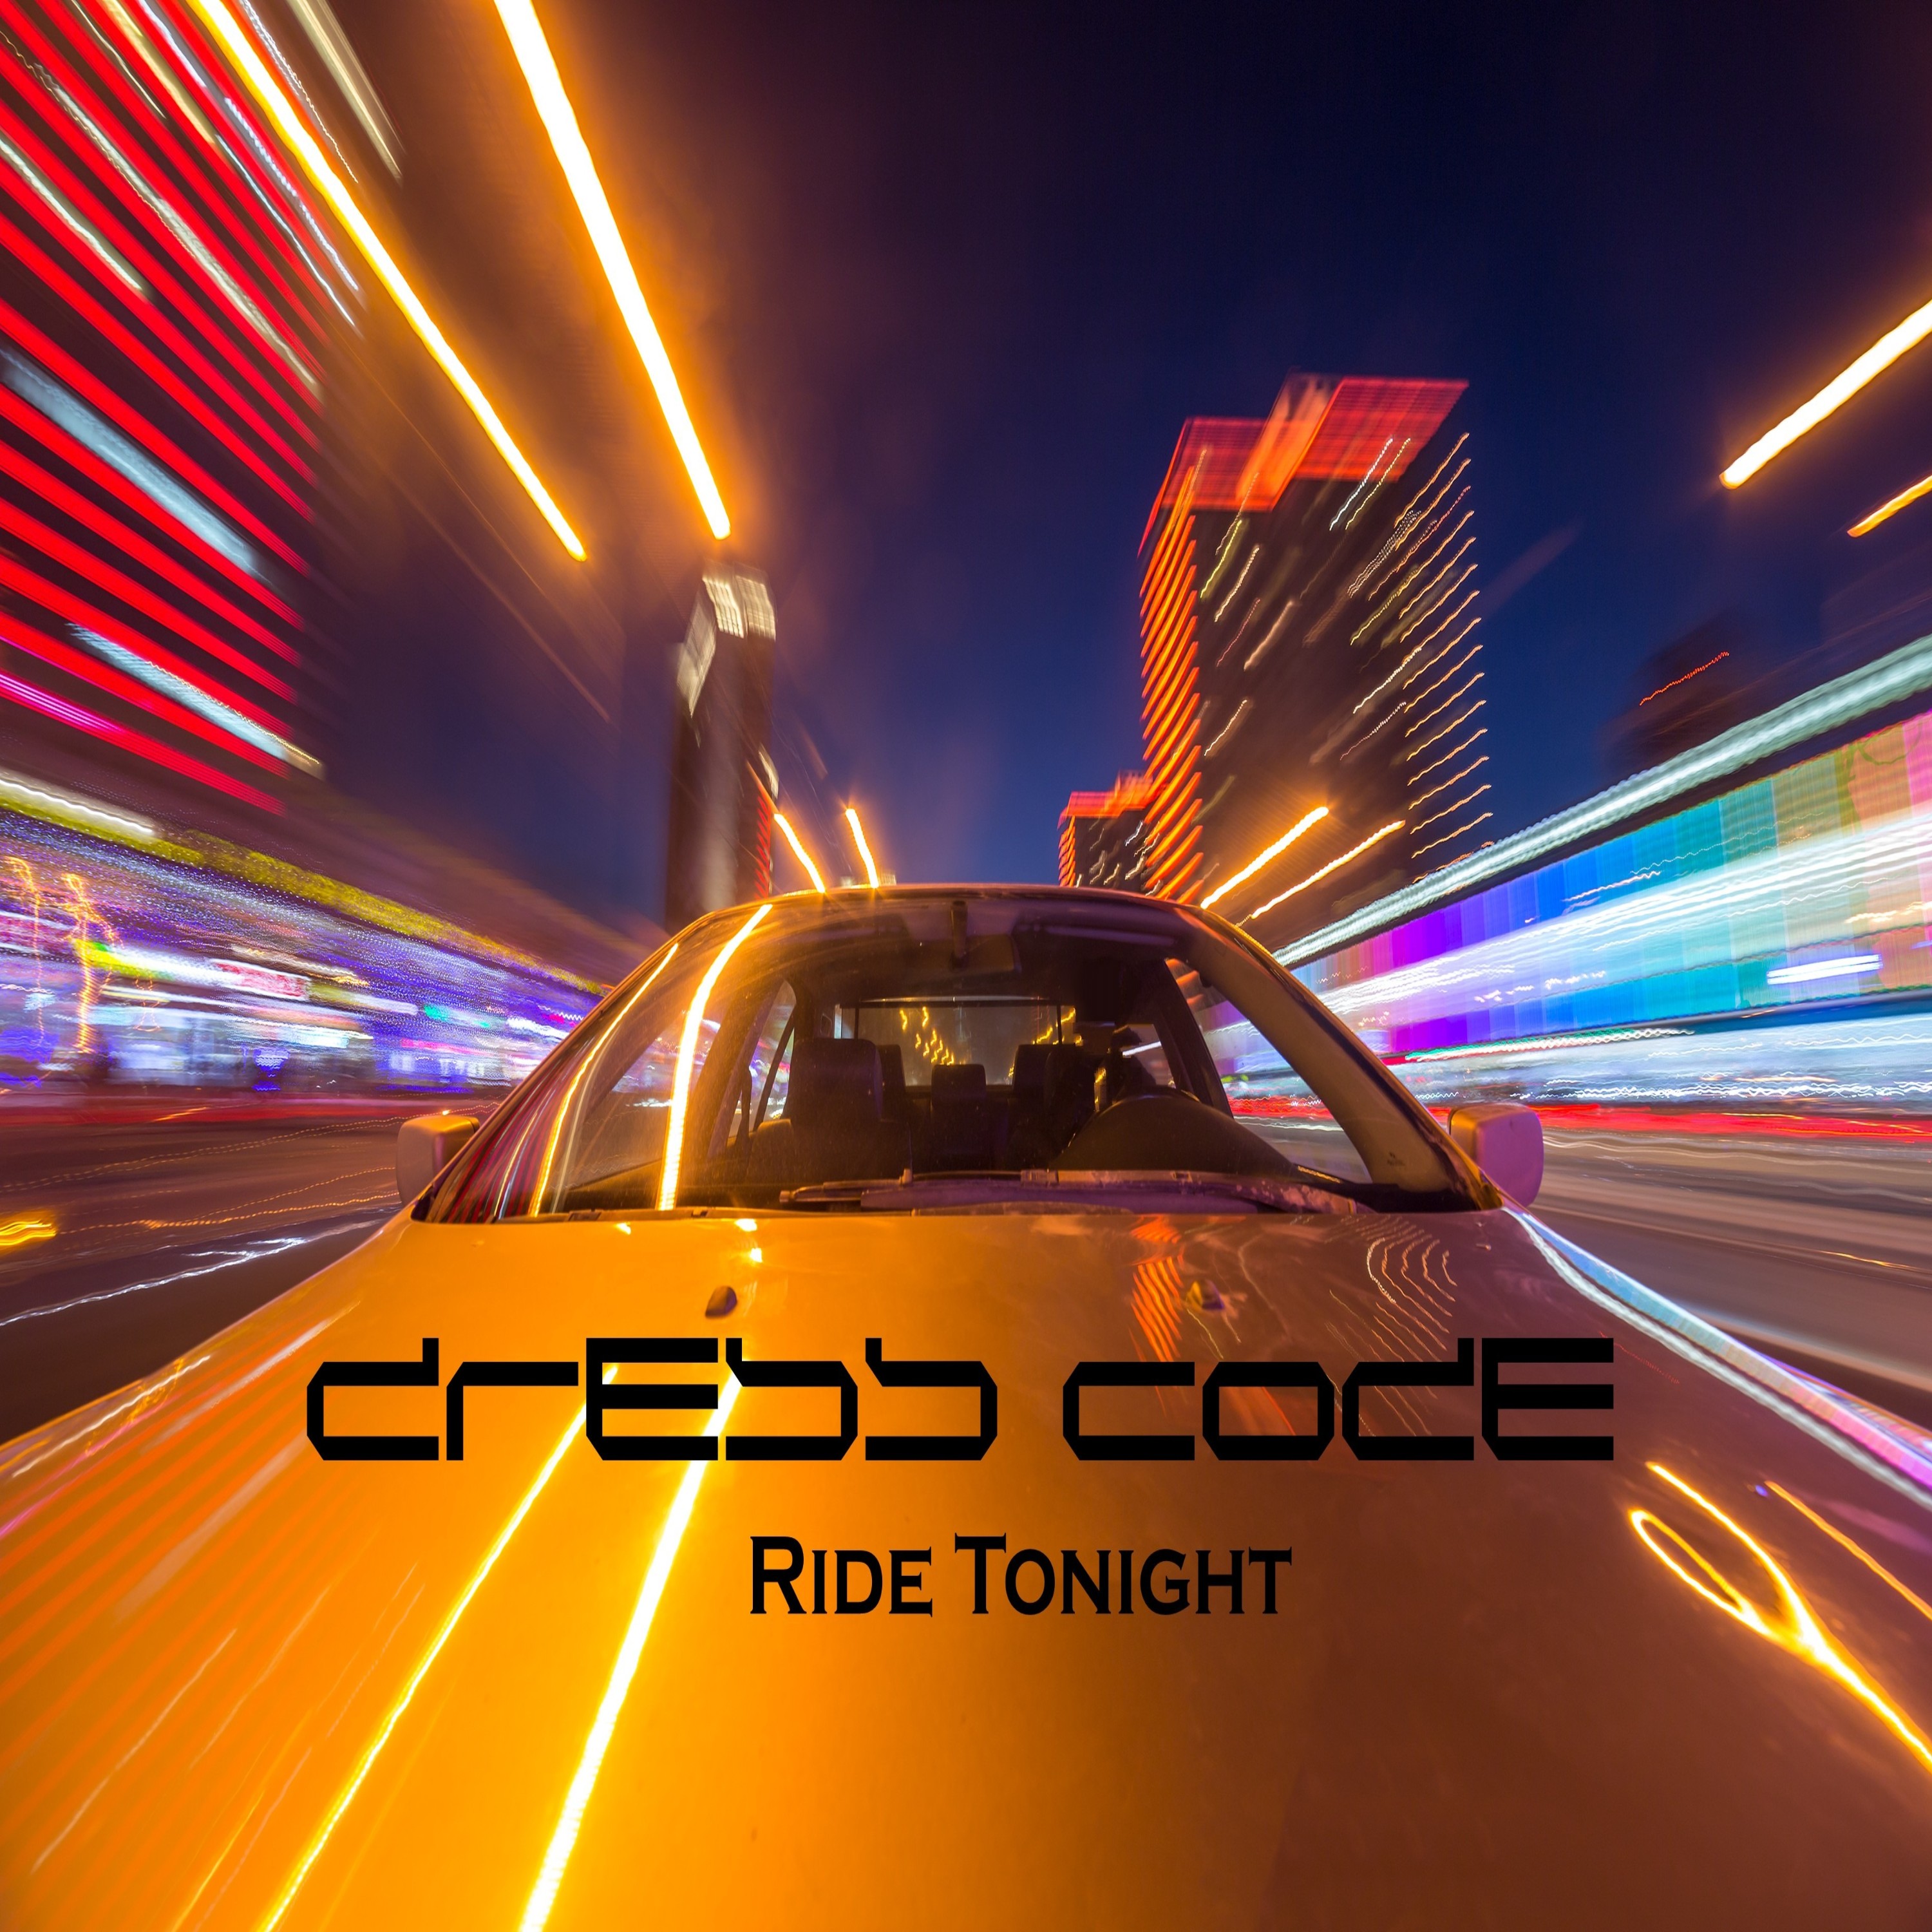 Dress Code Delivers Melodic Vocal EDM Single ‘Ride Tonight’